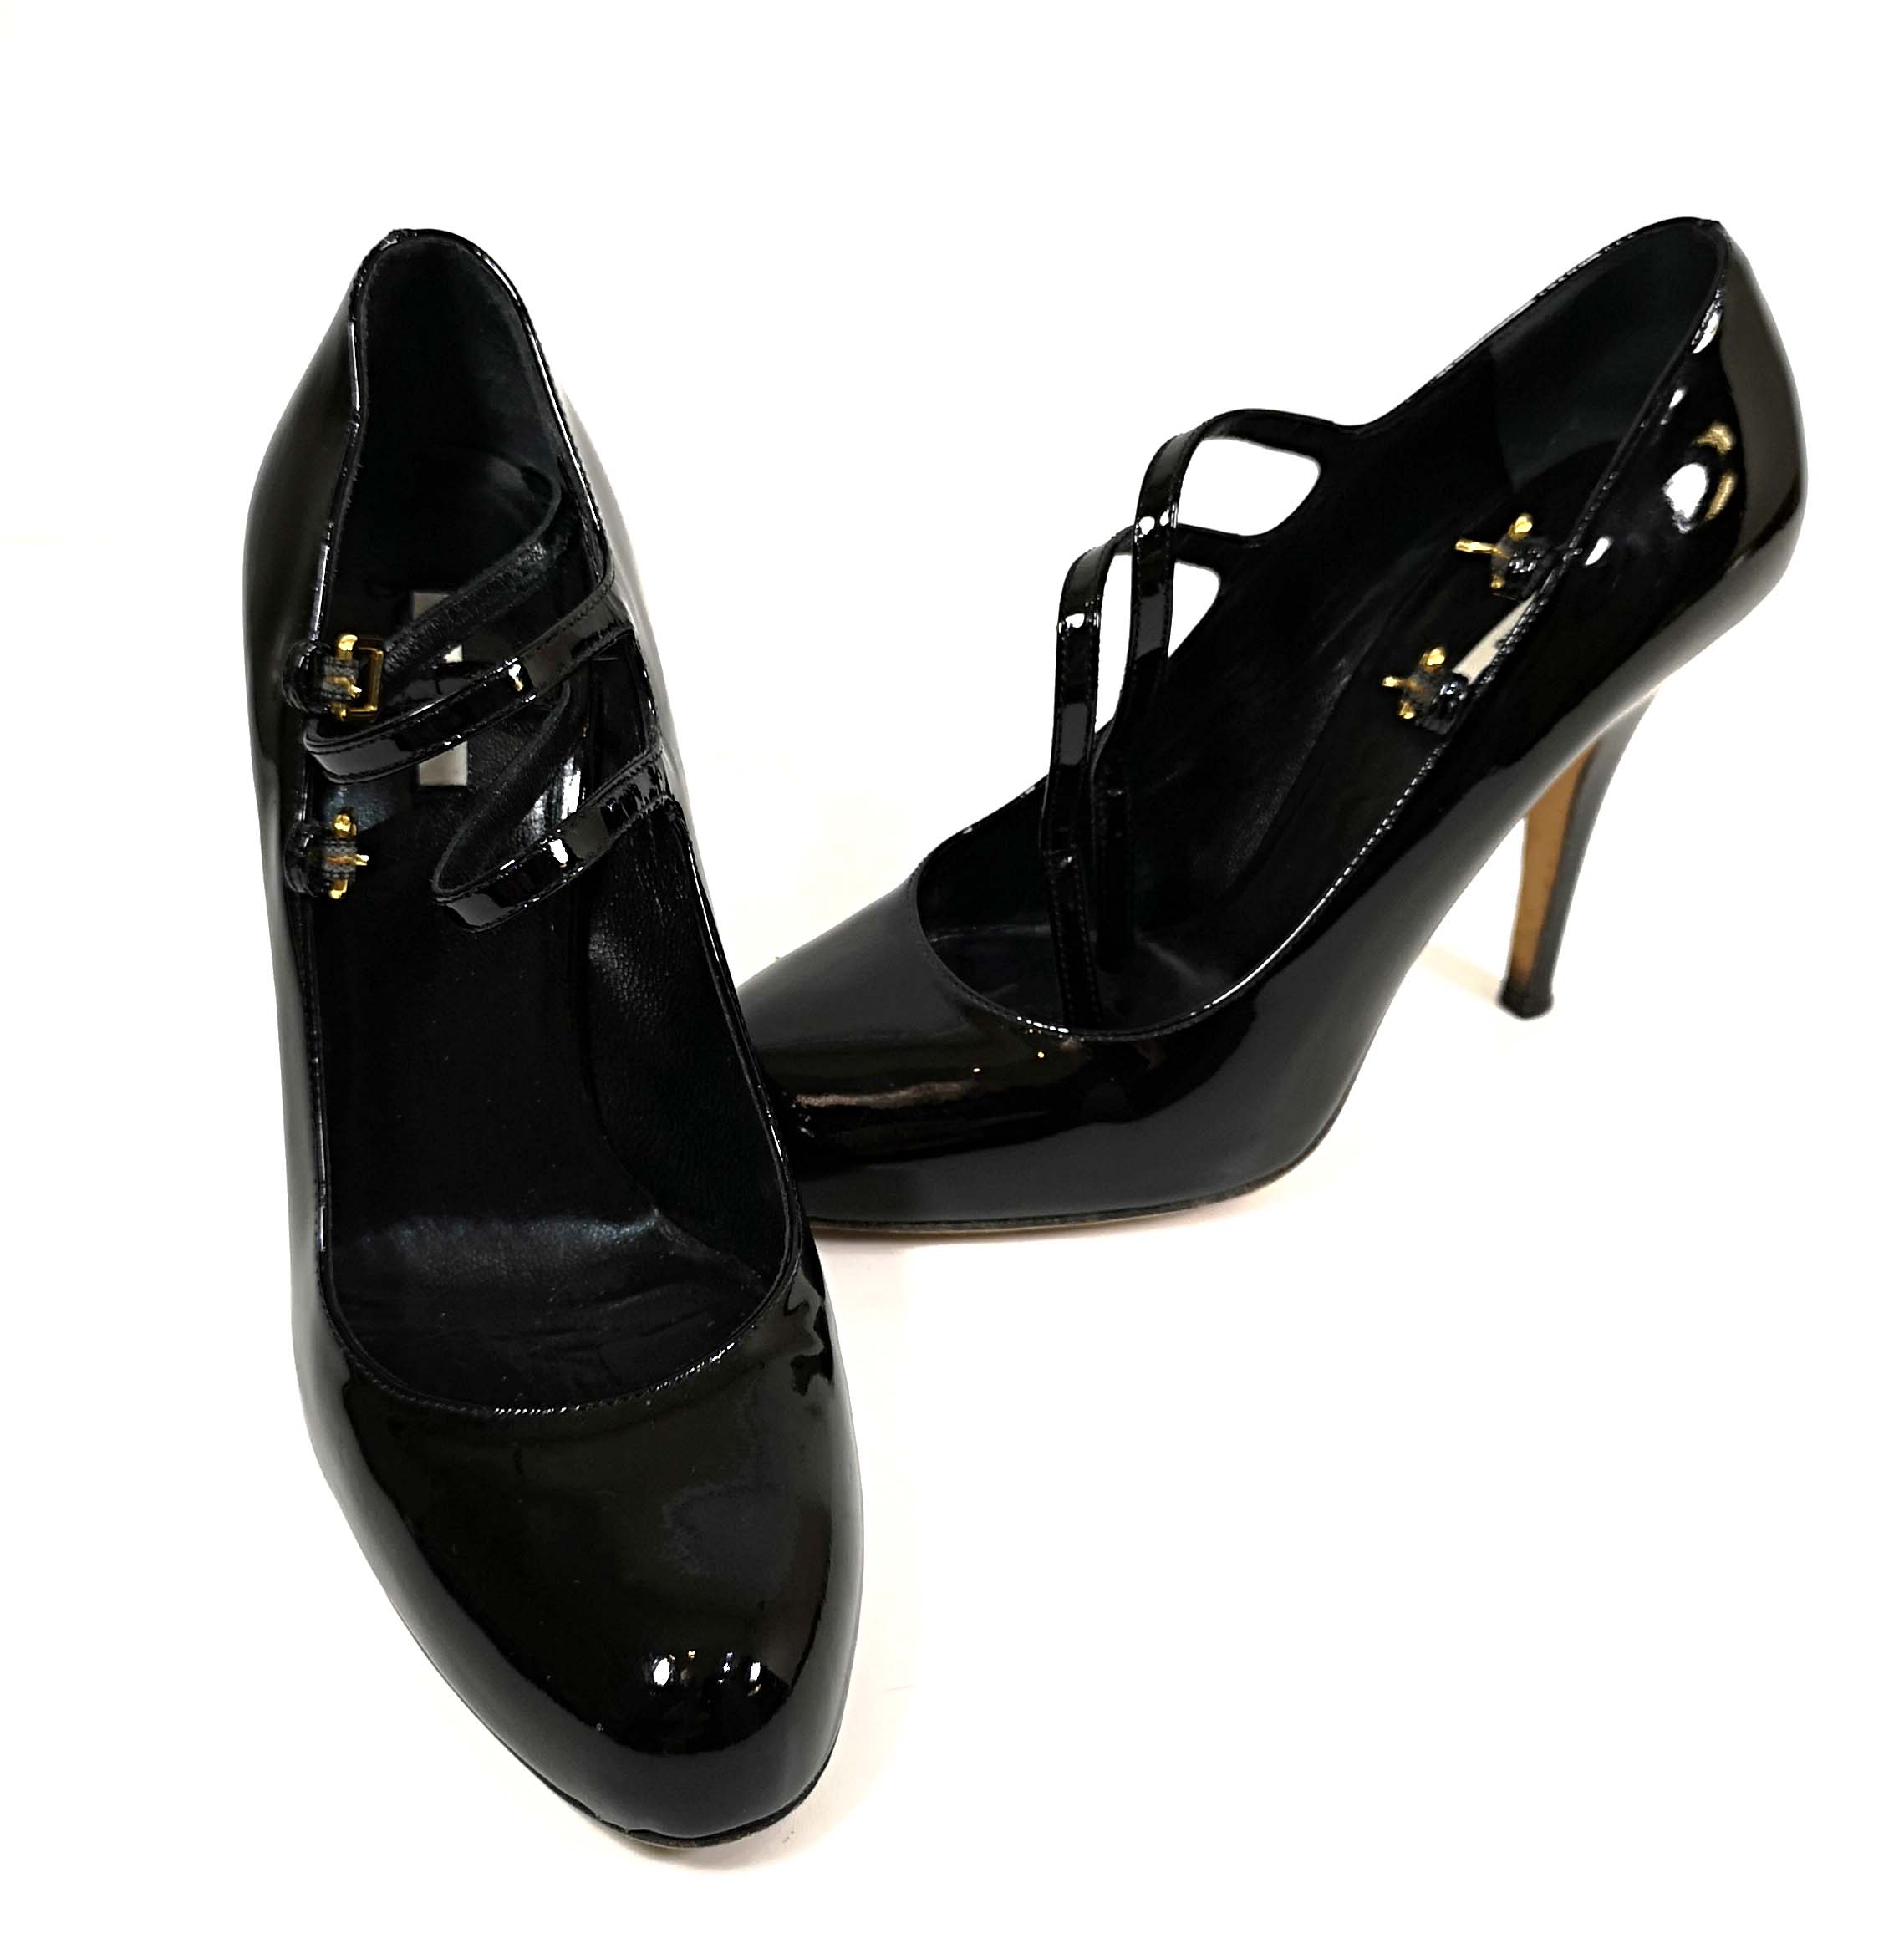 MIU MIU, A PAIR OF BLACK PATENT LEATHER DOUBLE STRAP MARY JANE HEELS (size 35).